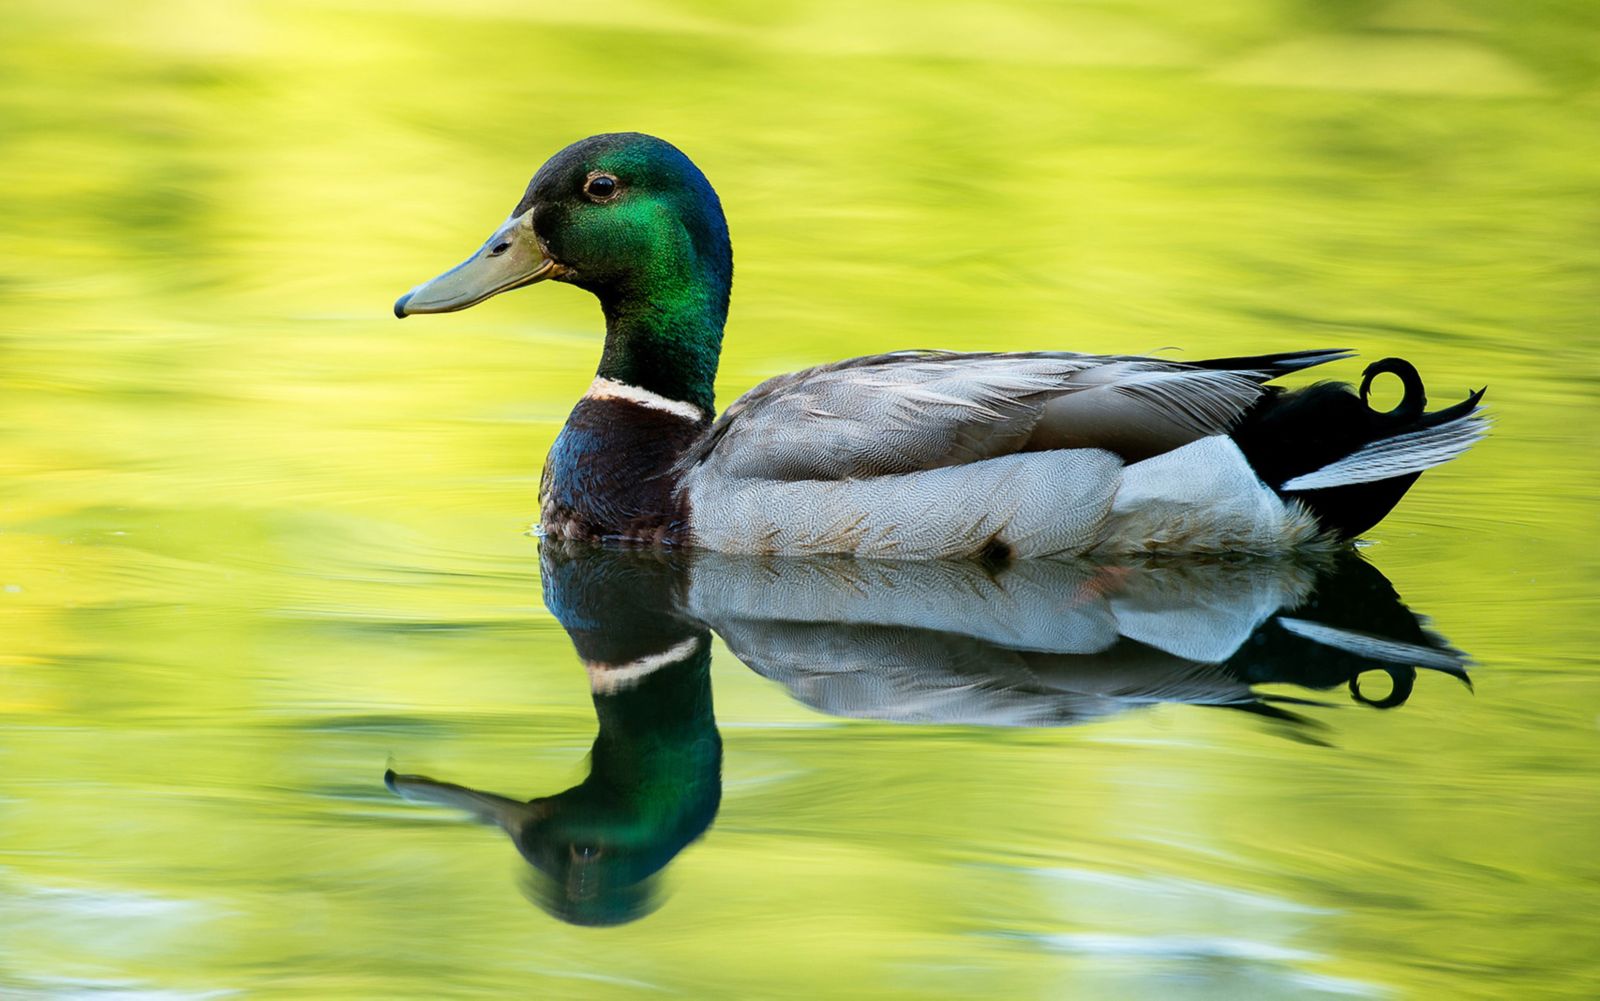 Duck with a green head floating in a pond